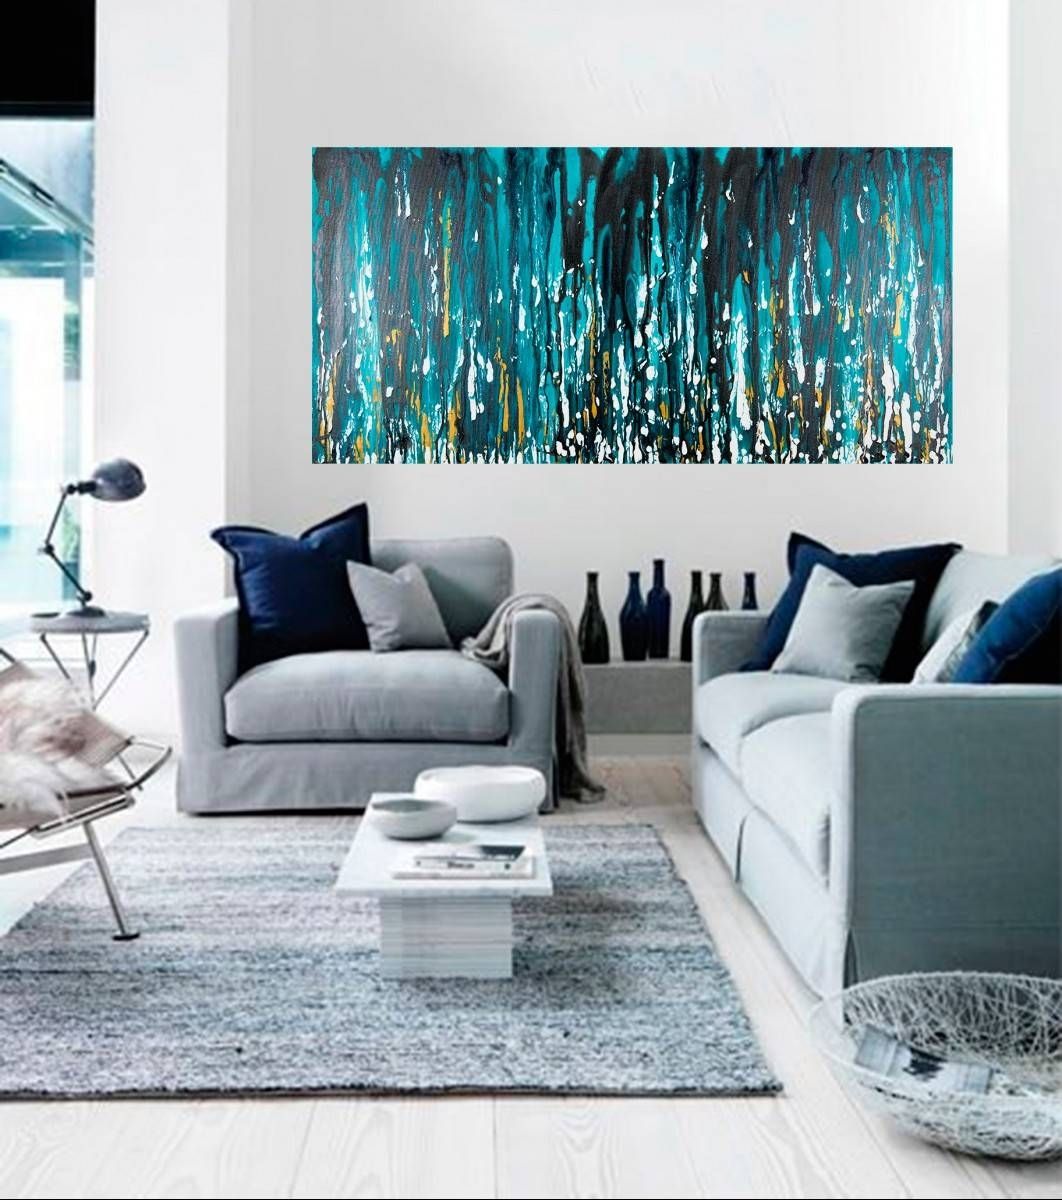 Meteor Showerqiqigallery 48"x24" Stretched Canvas Original In Current Turquoise And Black Wall Art (Gallery 7 of 20)